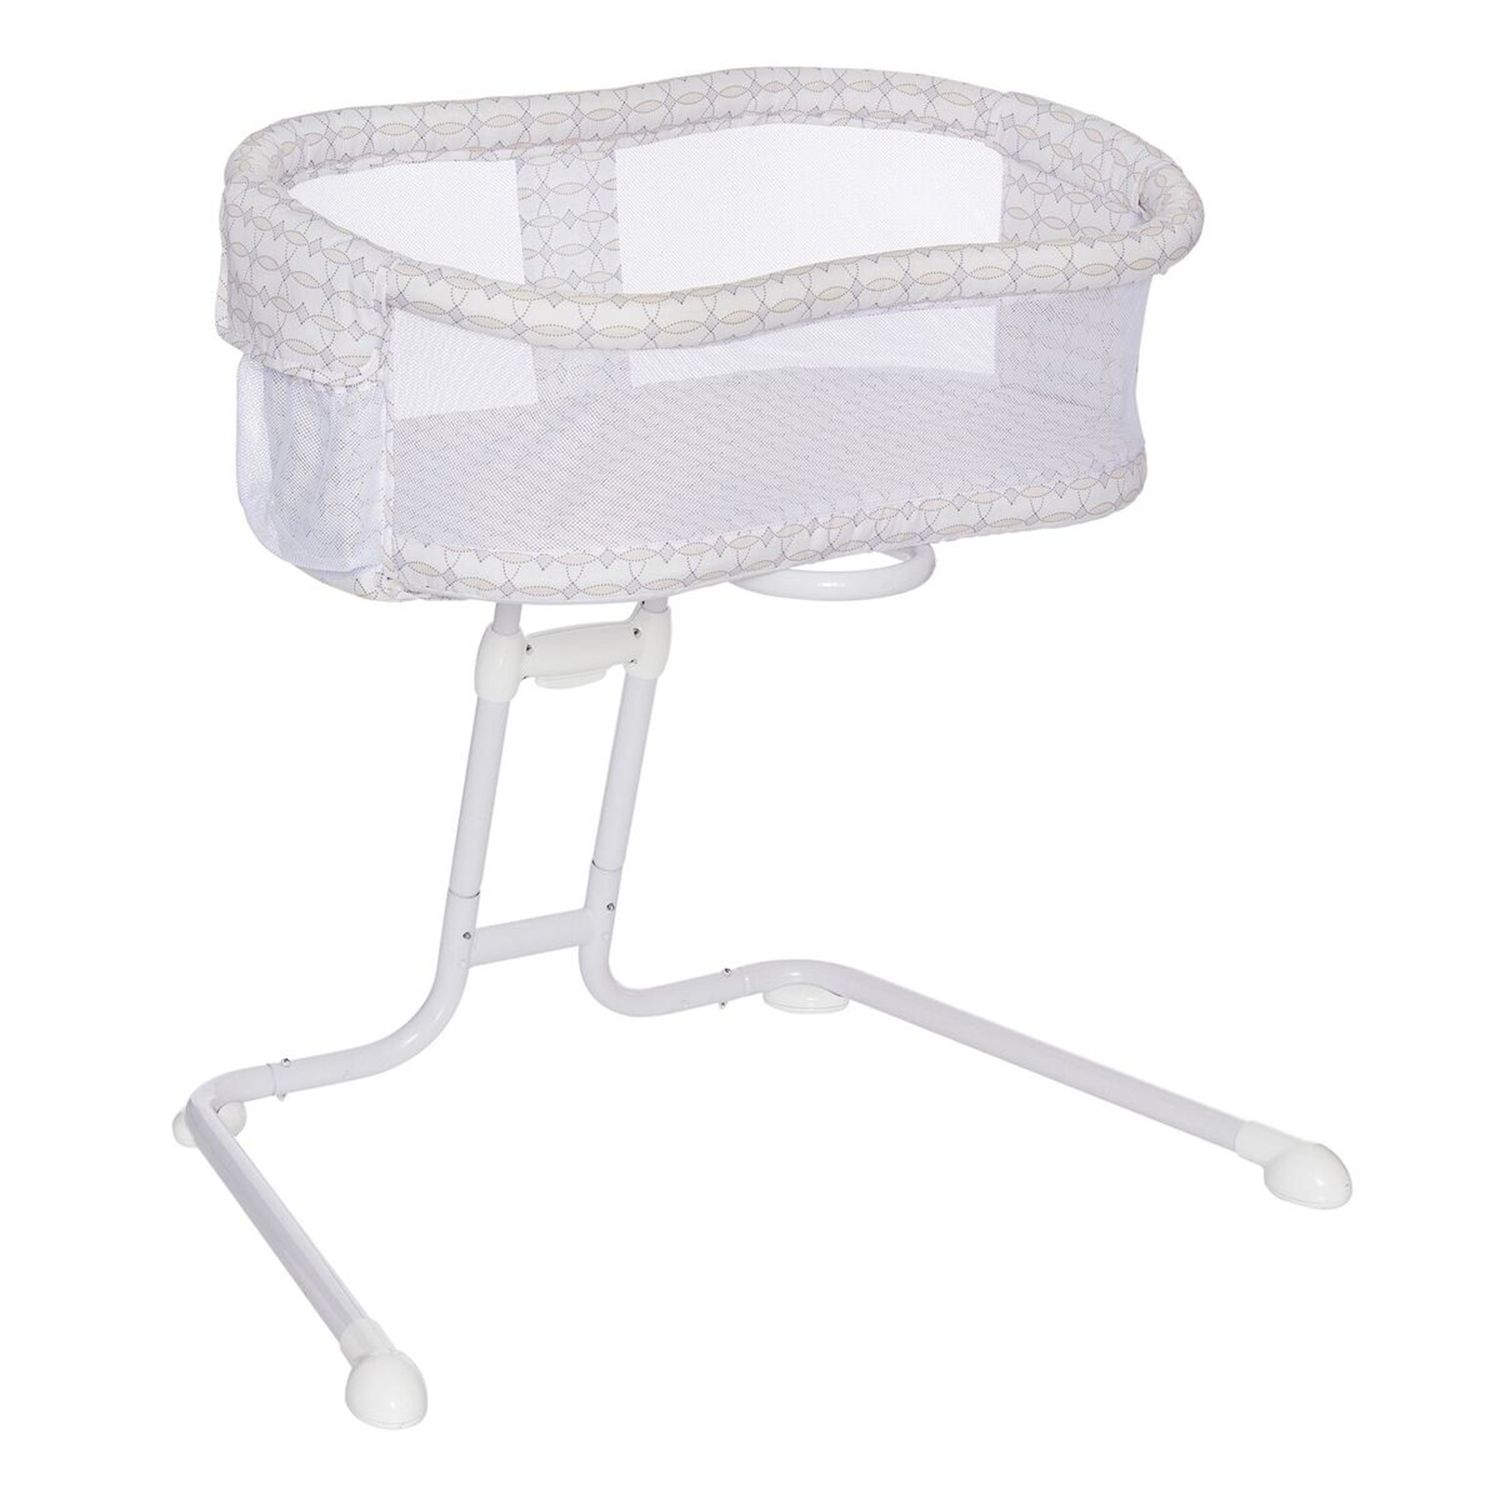 is the halo bassinet worth it